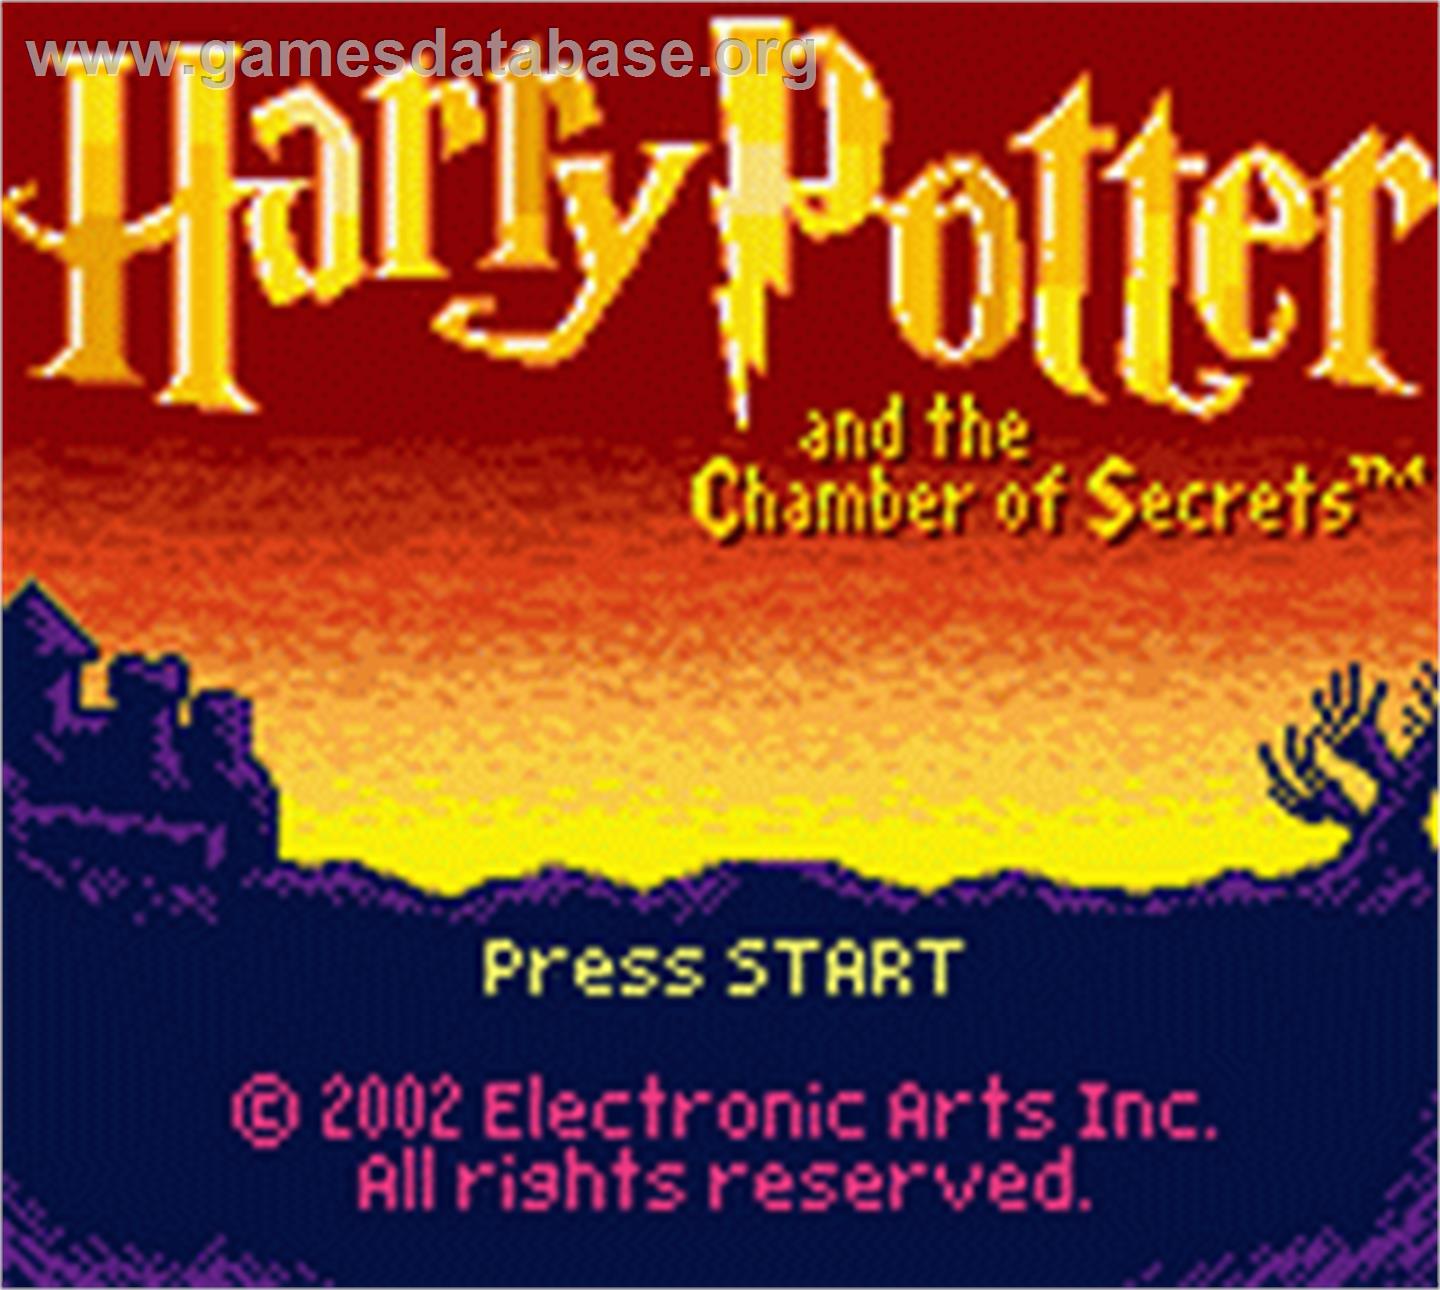 Harry Potter and the Chamber of Secrets - Nintendo Game Boy Color - Artwork - Title Screen